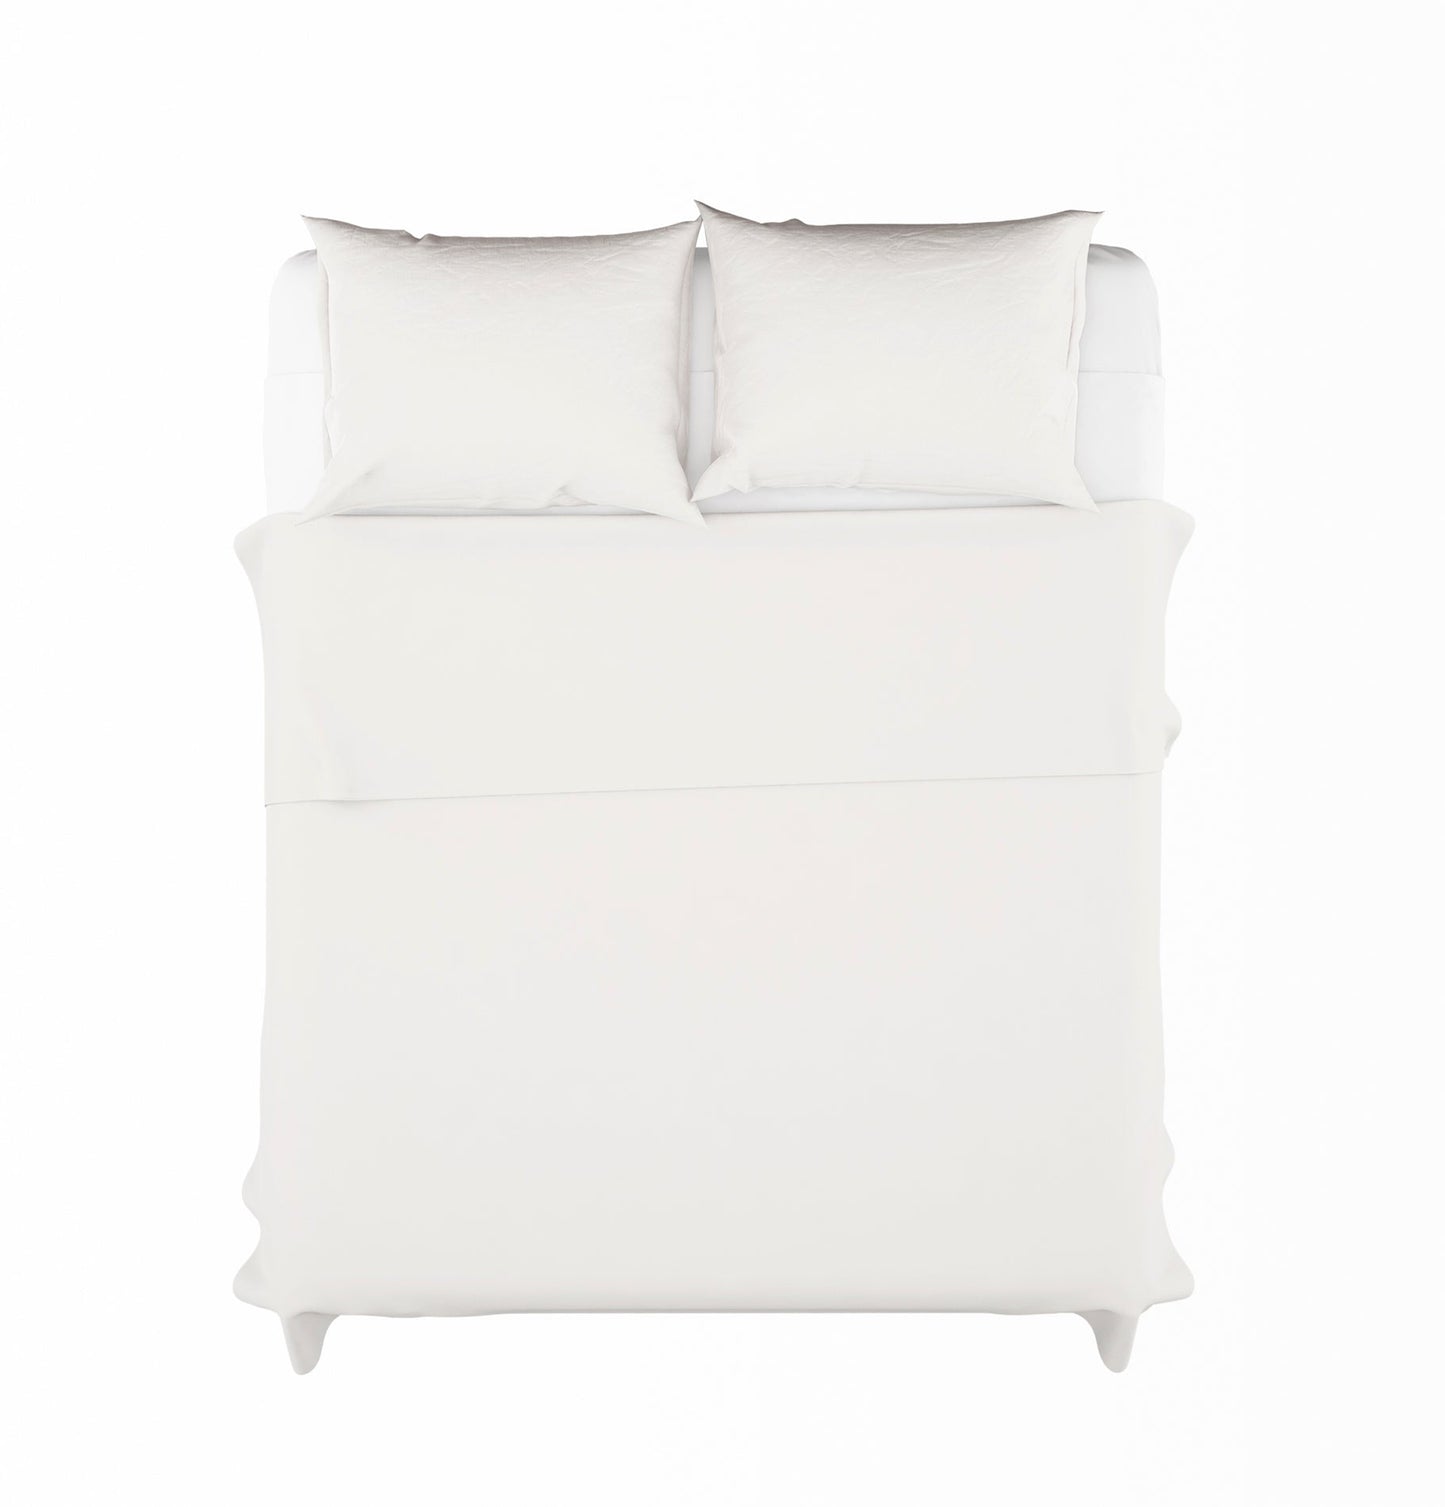 Smooth Top Sheet Percale 200h White Bed 135